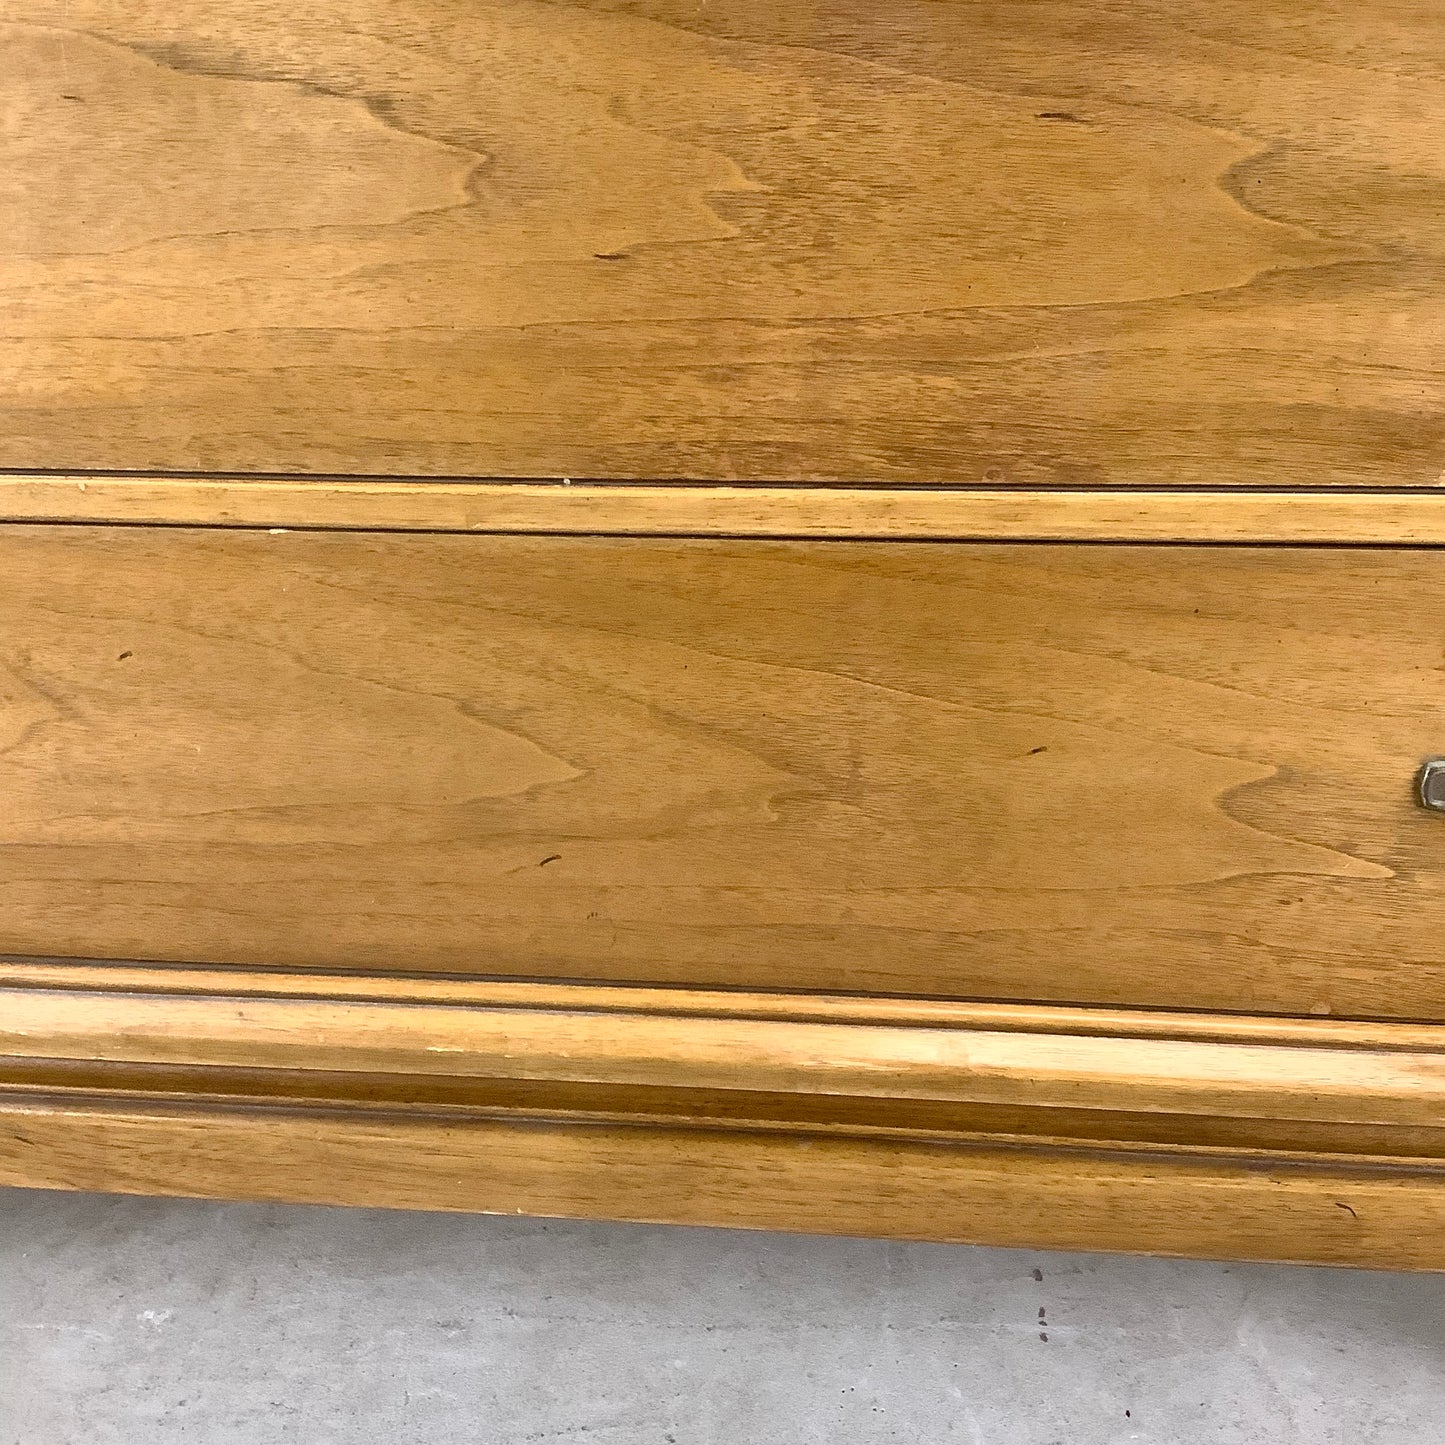 Tall Mid-Century Chest of Drawers for Bedroom Storage